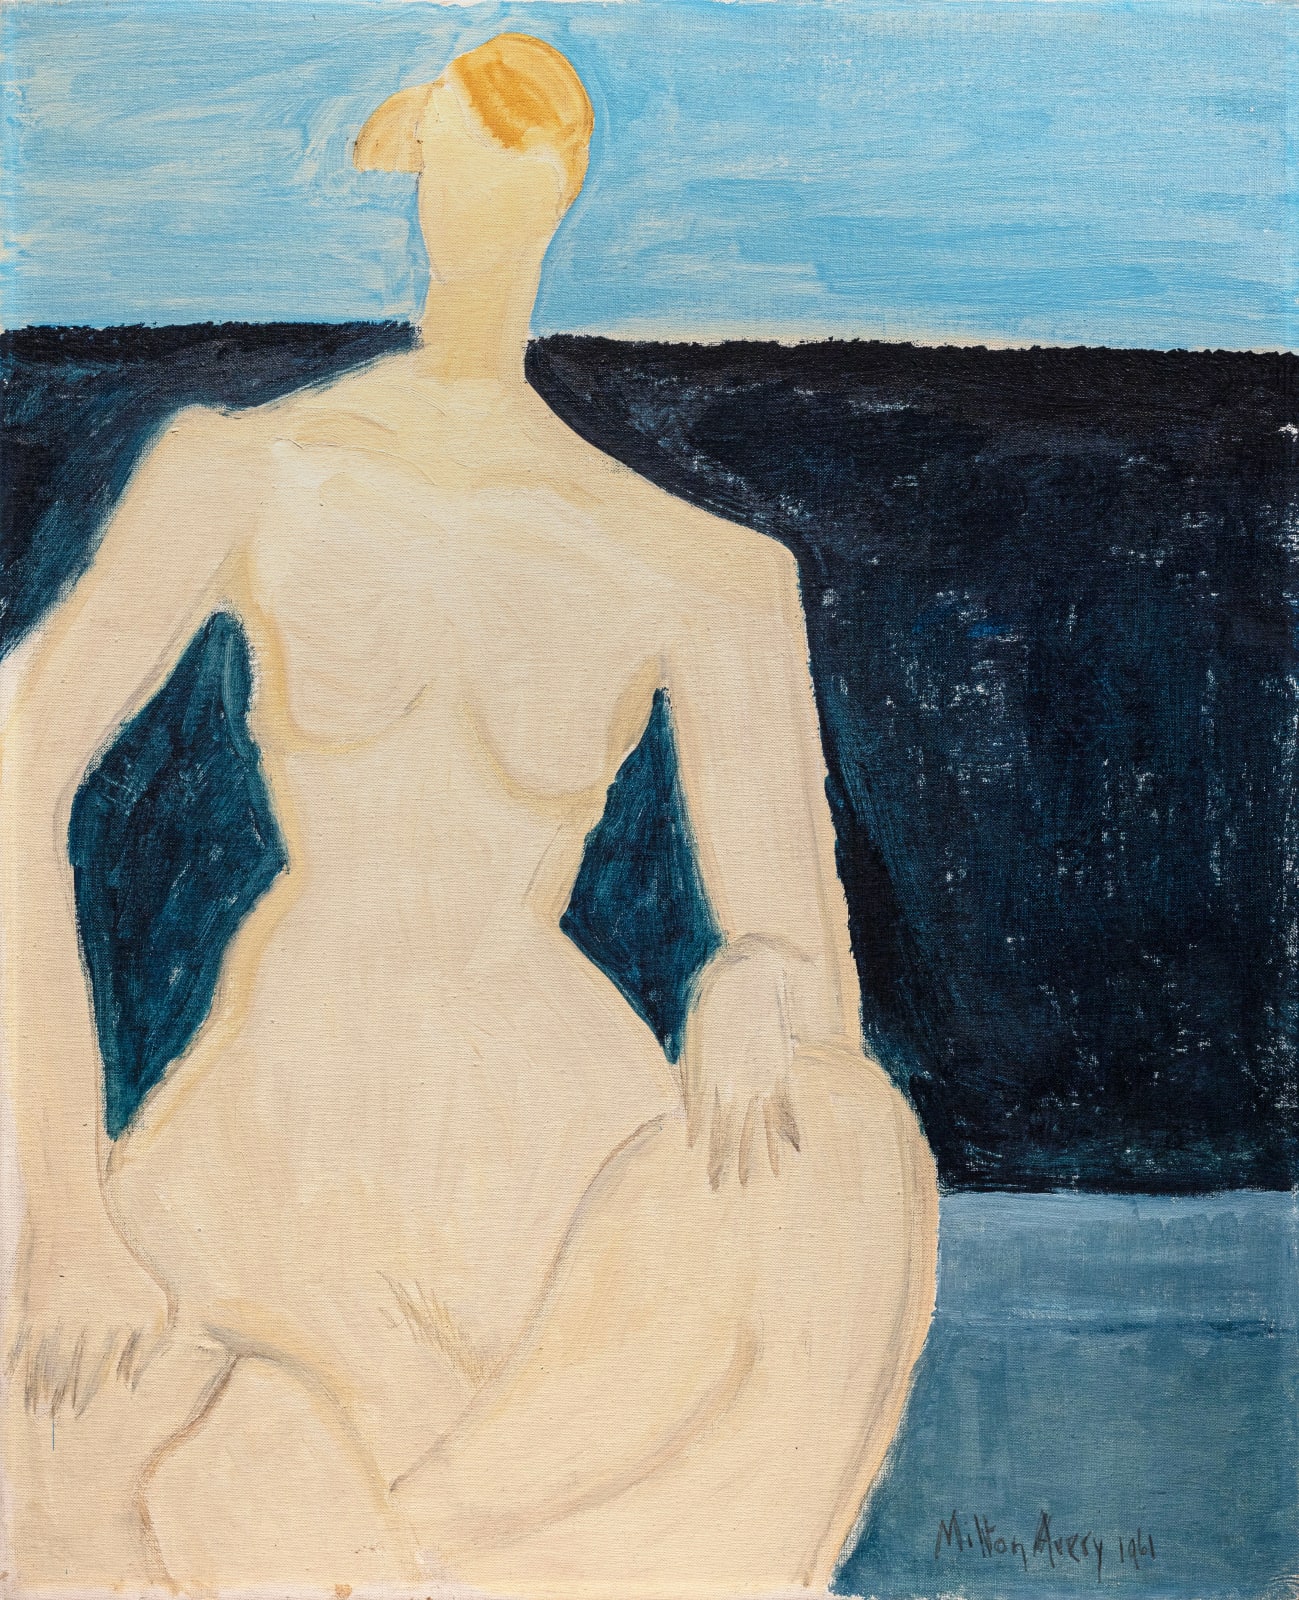 Milton Avery, Nude by the Sea, 1961